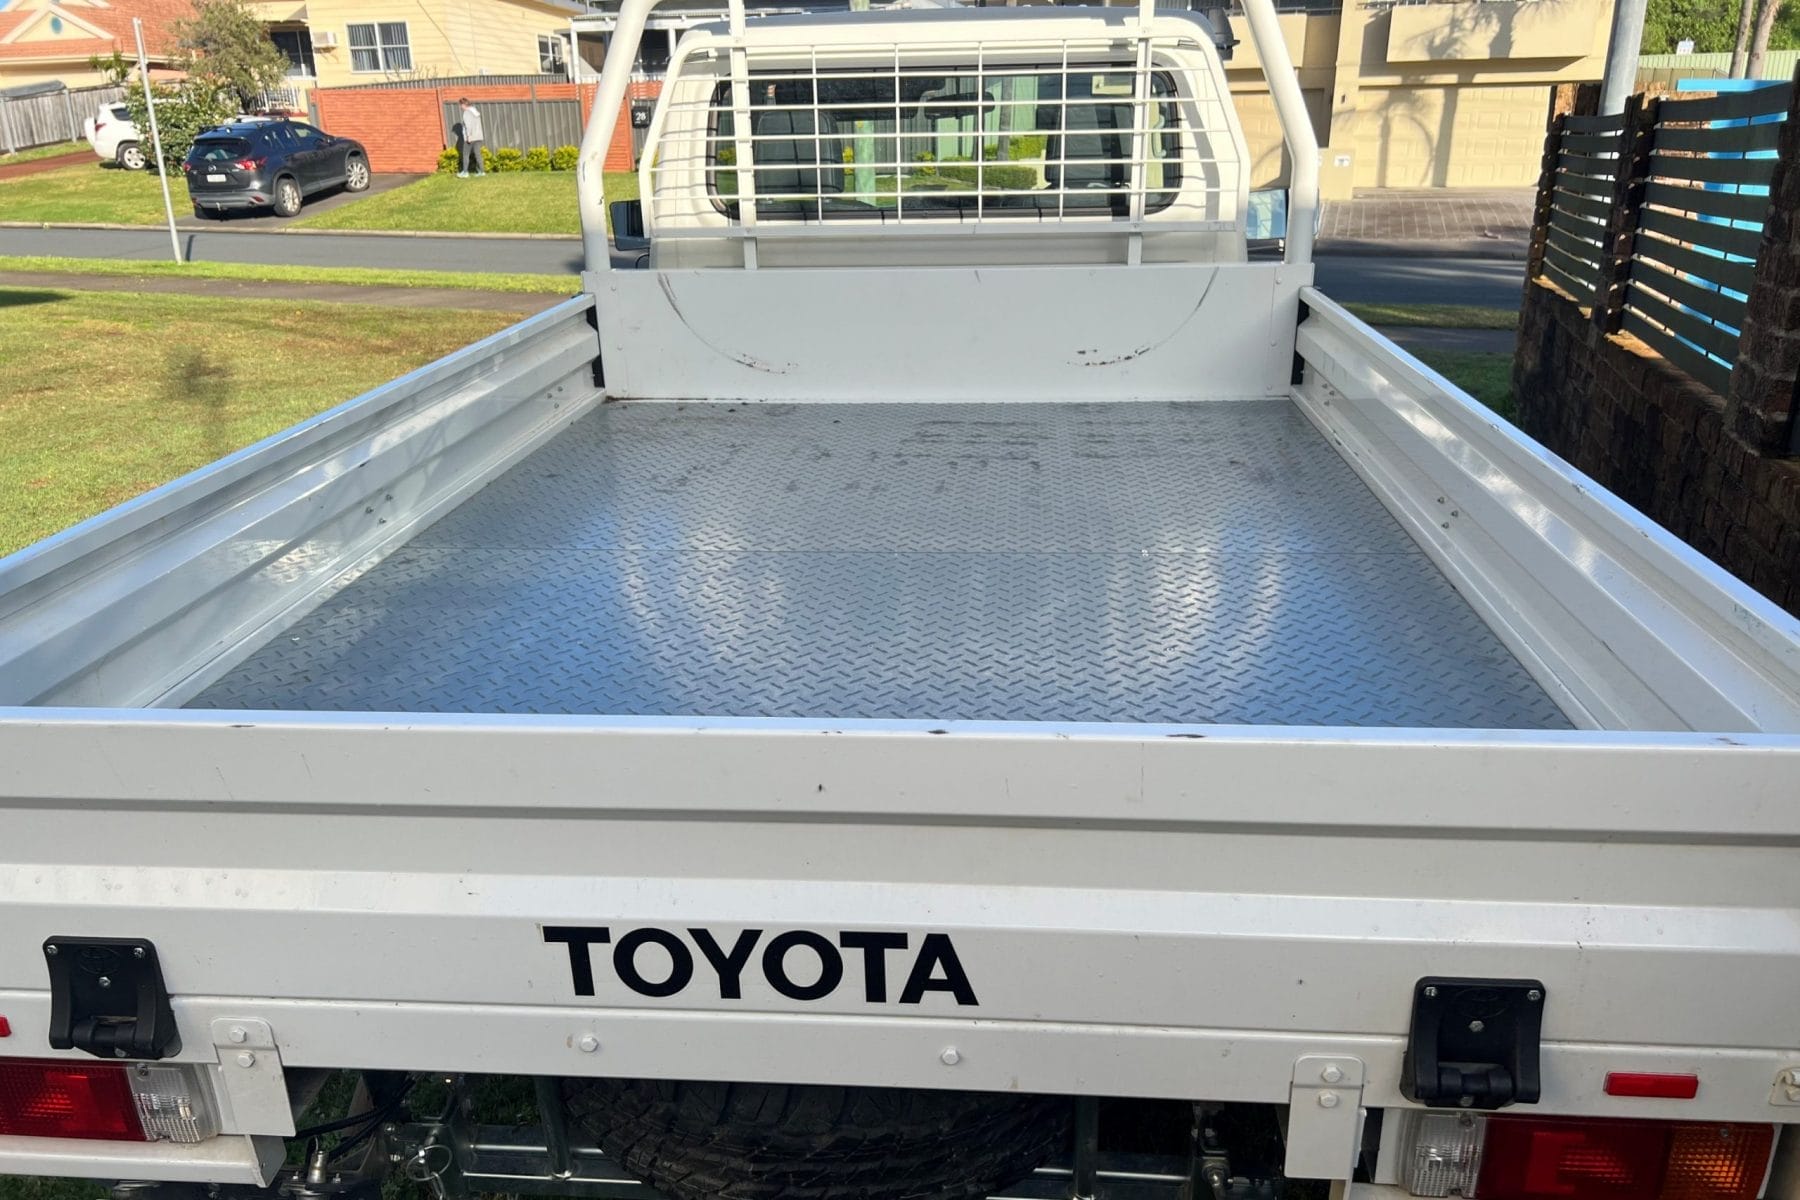 Toyota LandCruiser 79 series single cab chassis 70th Anniversary Ute tray